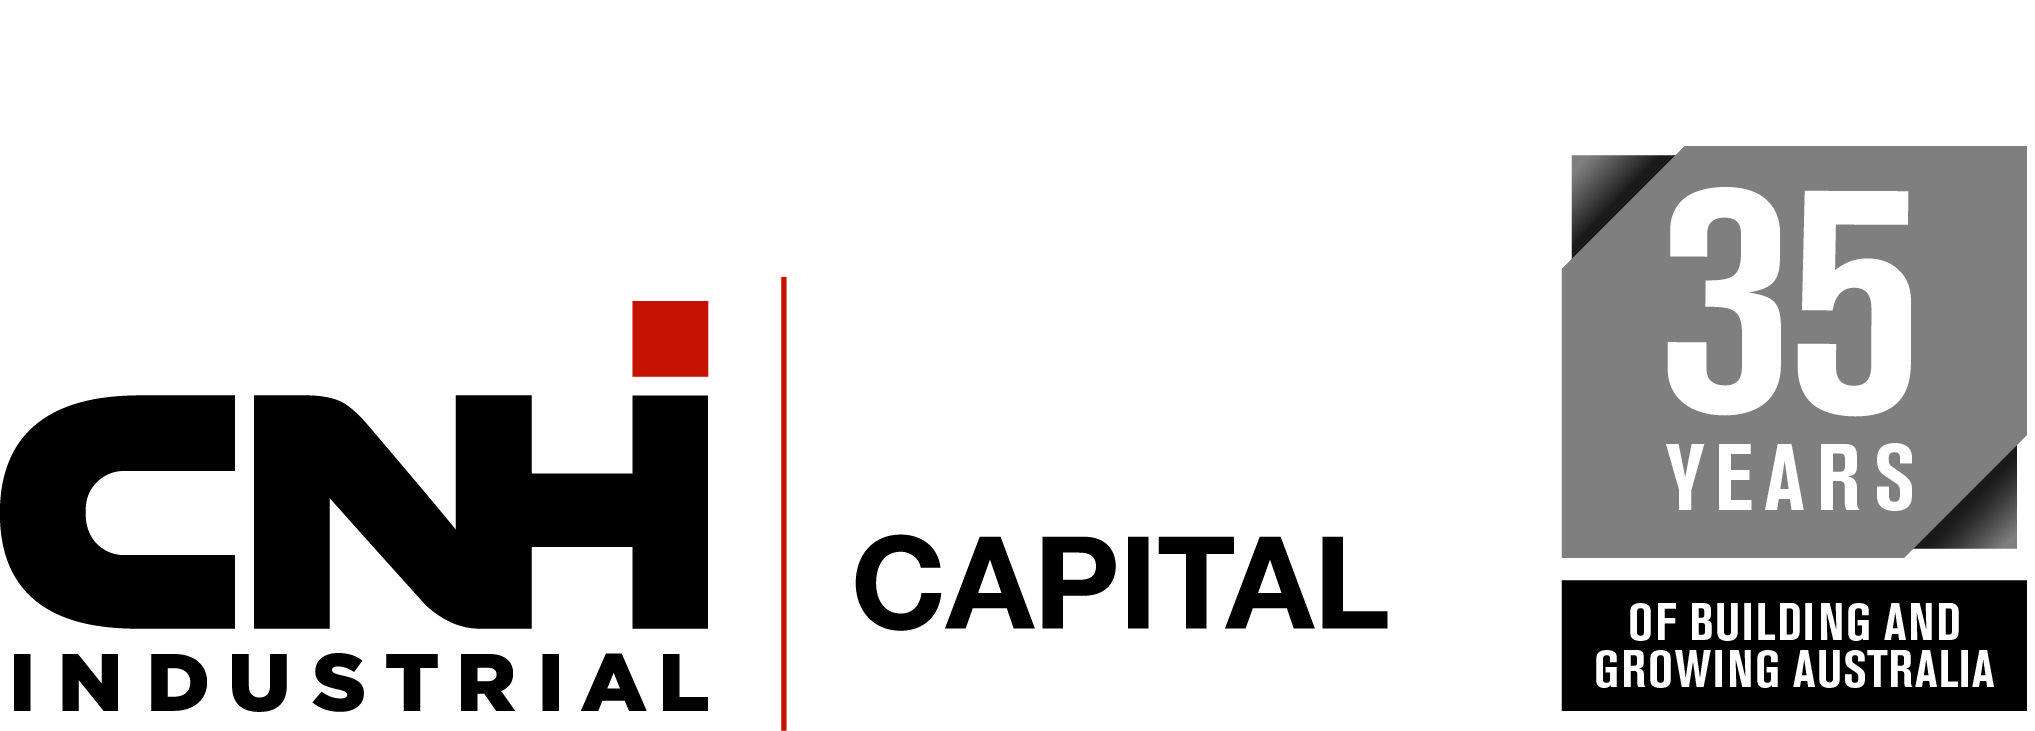 CNH Industrial Logo - Our History | CNHIndustrial Capital